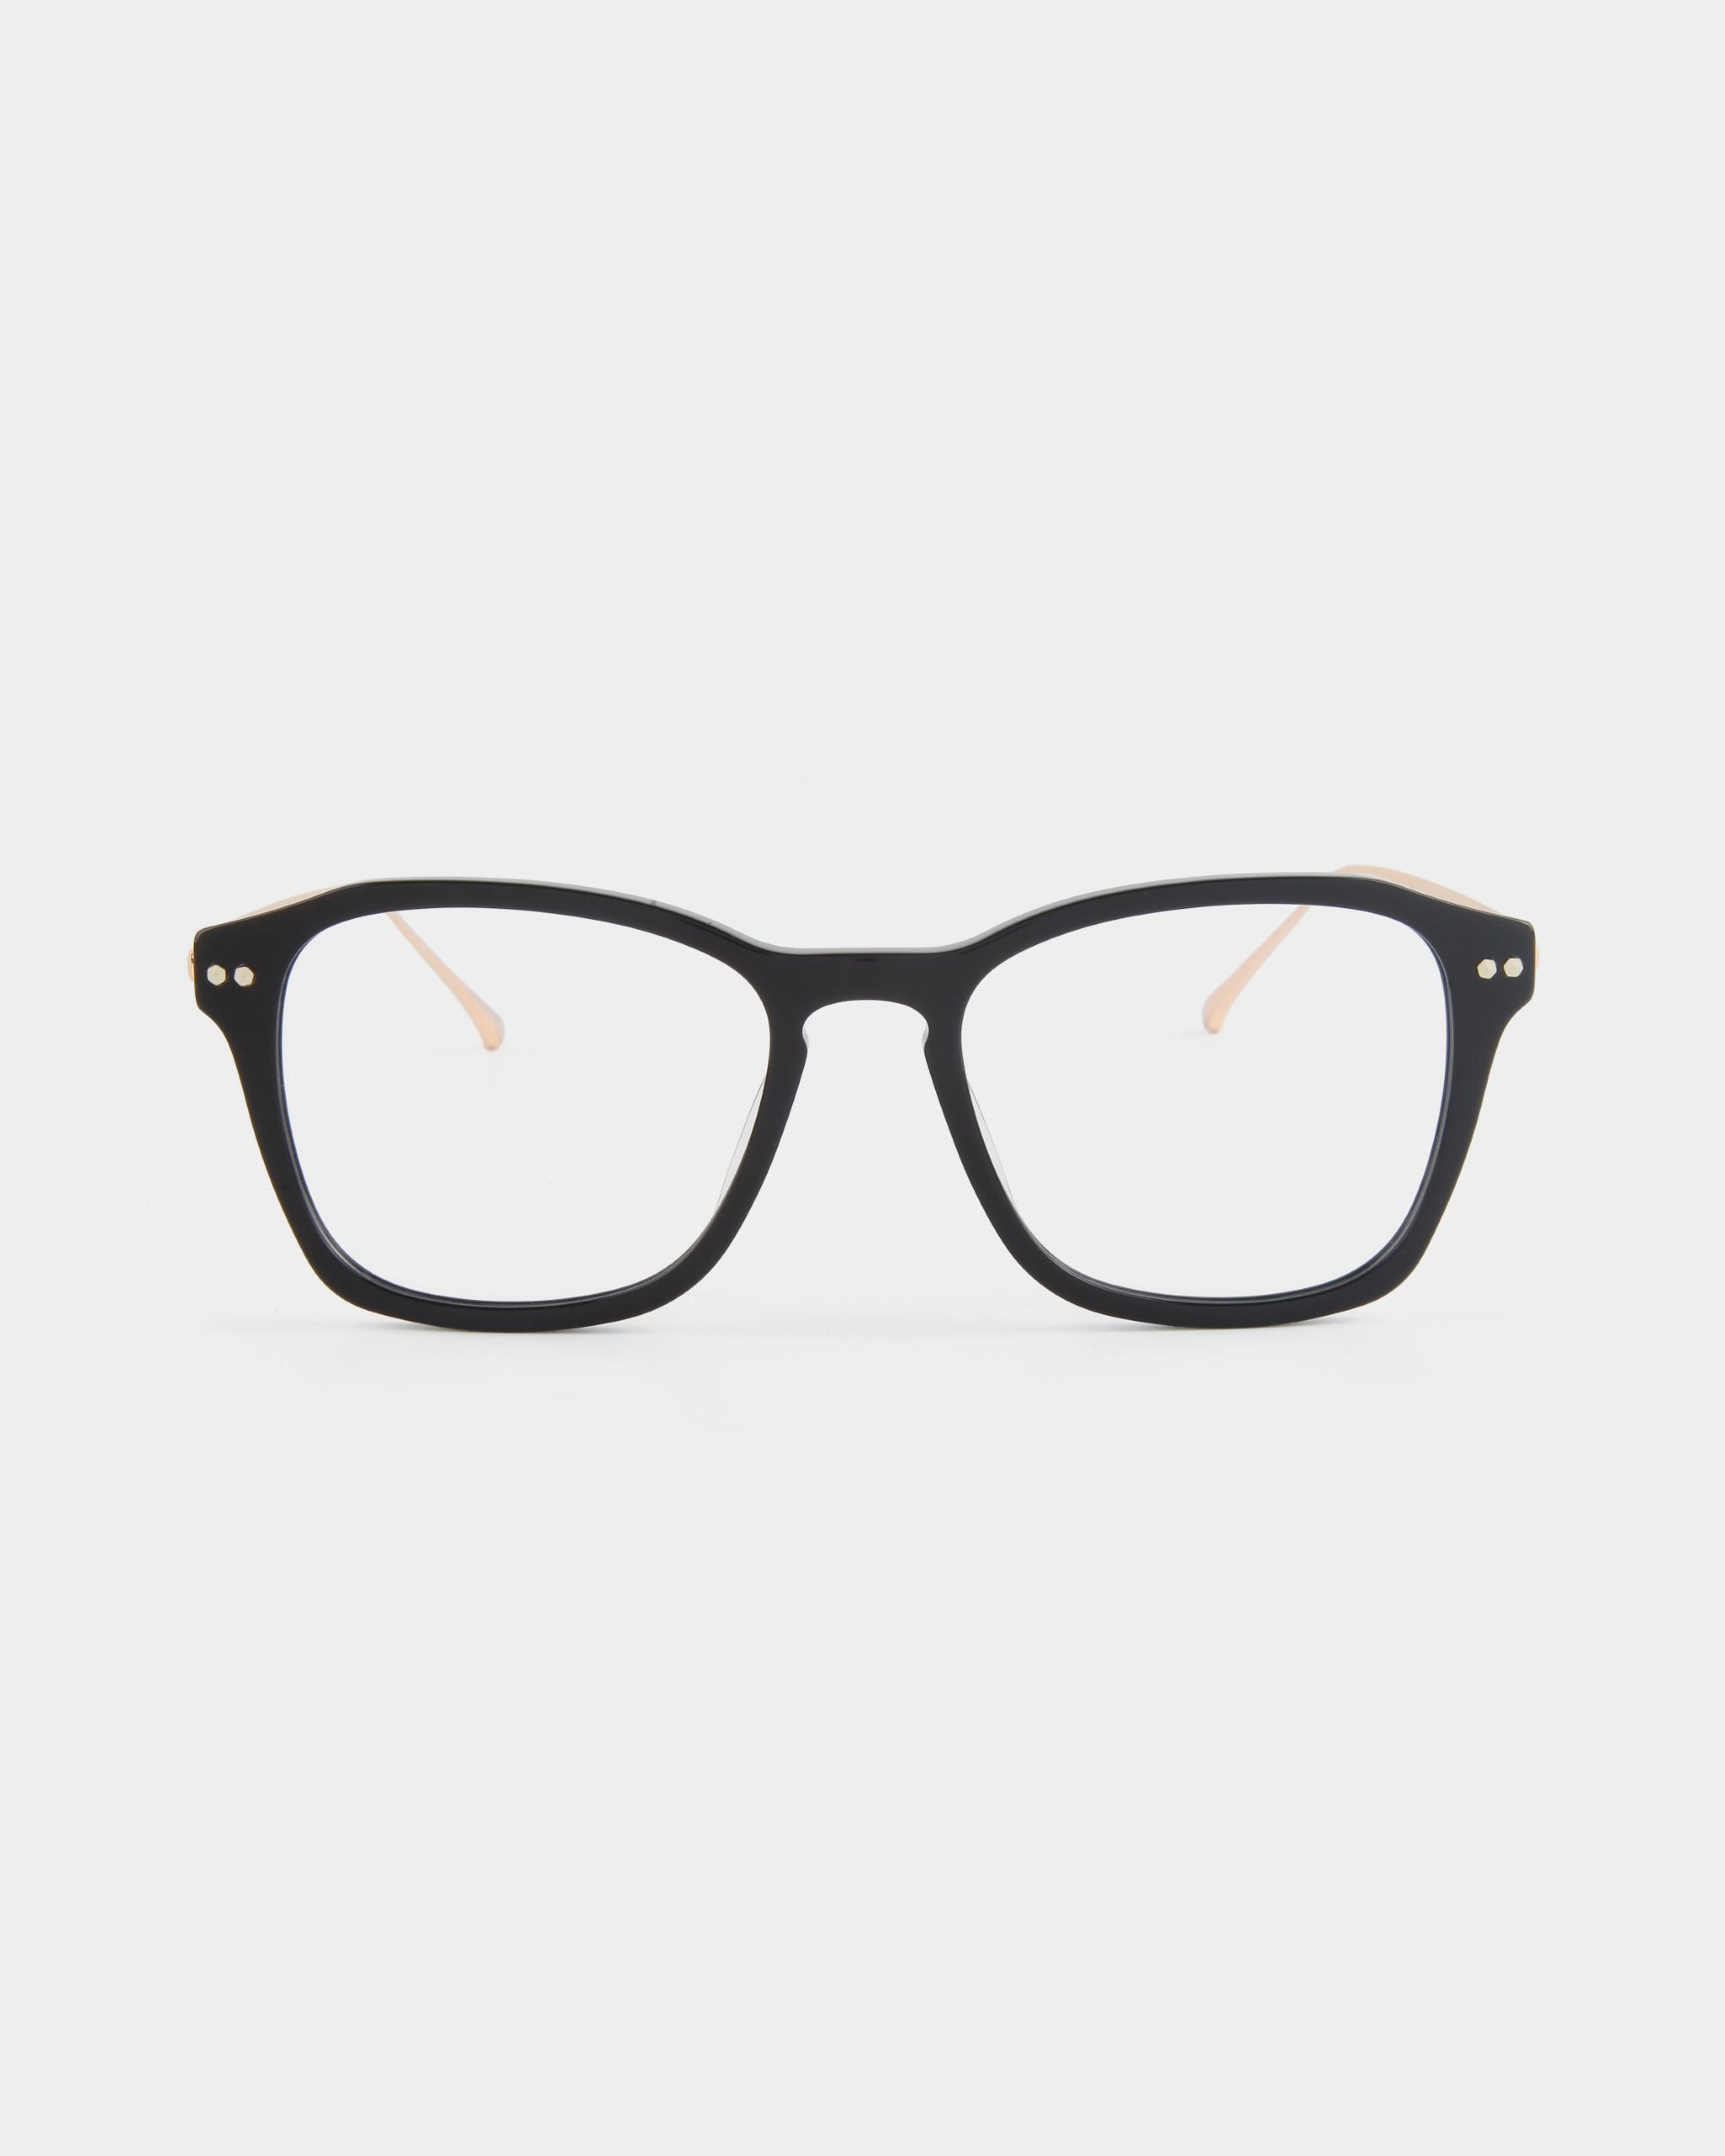 Black rectangular eyeglasses, named &quot;Morris&quot; by For Art&#39;s Sake®, with a glossy finish are shown against a plain white background. The glasses feature subtle metallic details on the upper corners of the stainless steel frames and thin, light-colored temple arms.